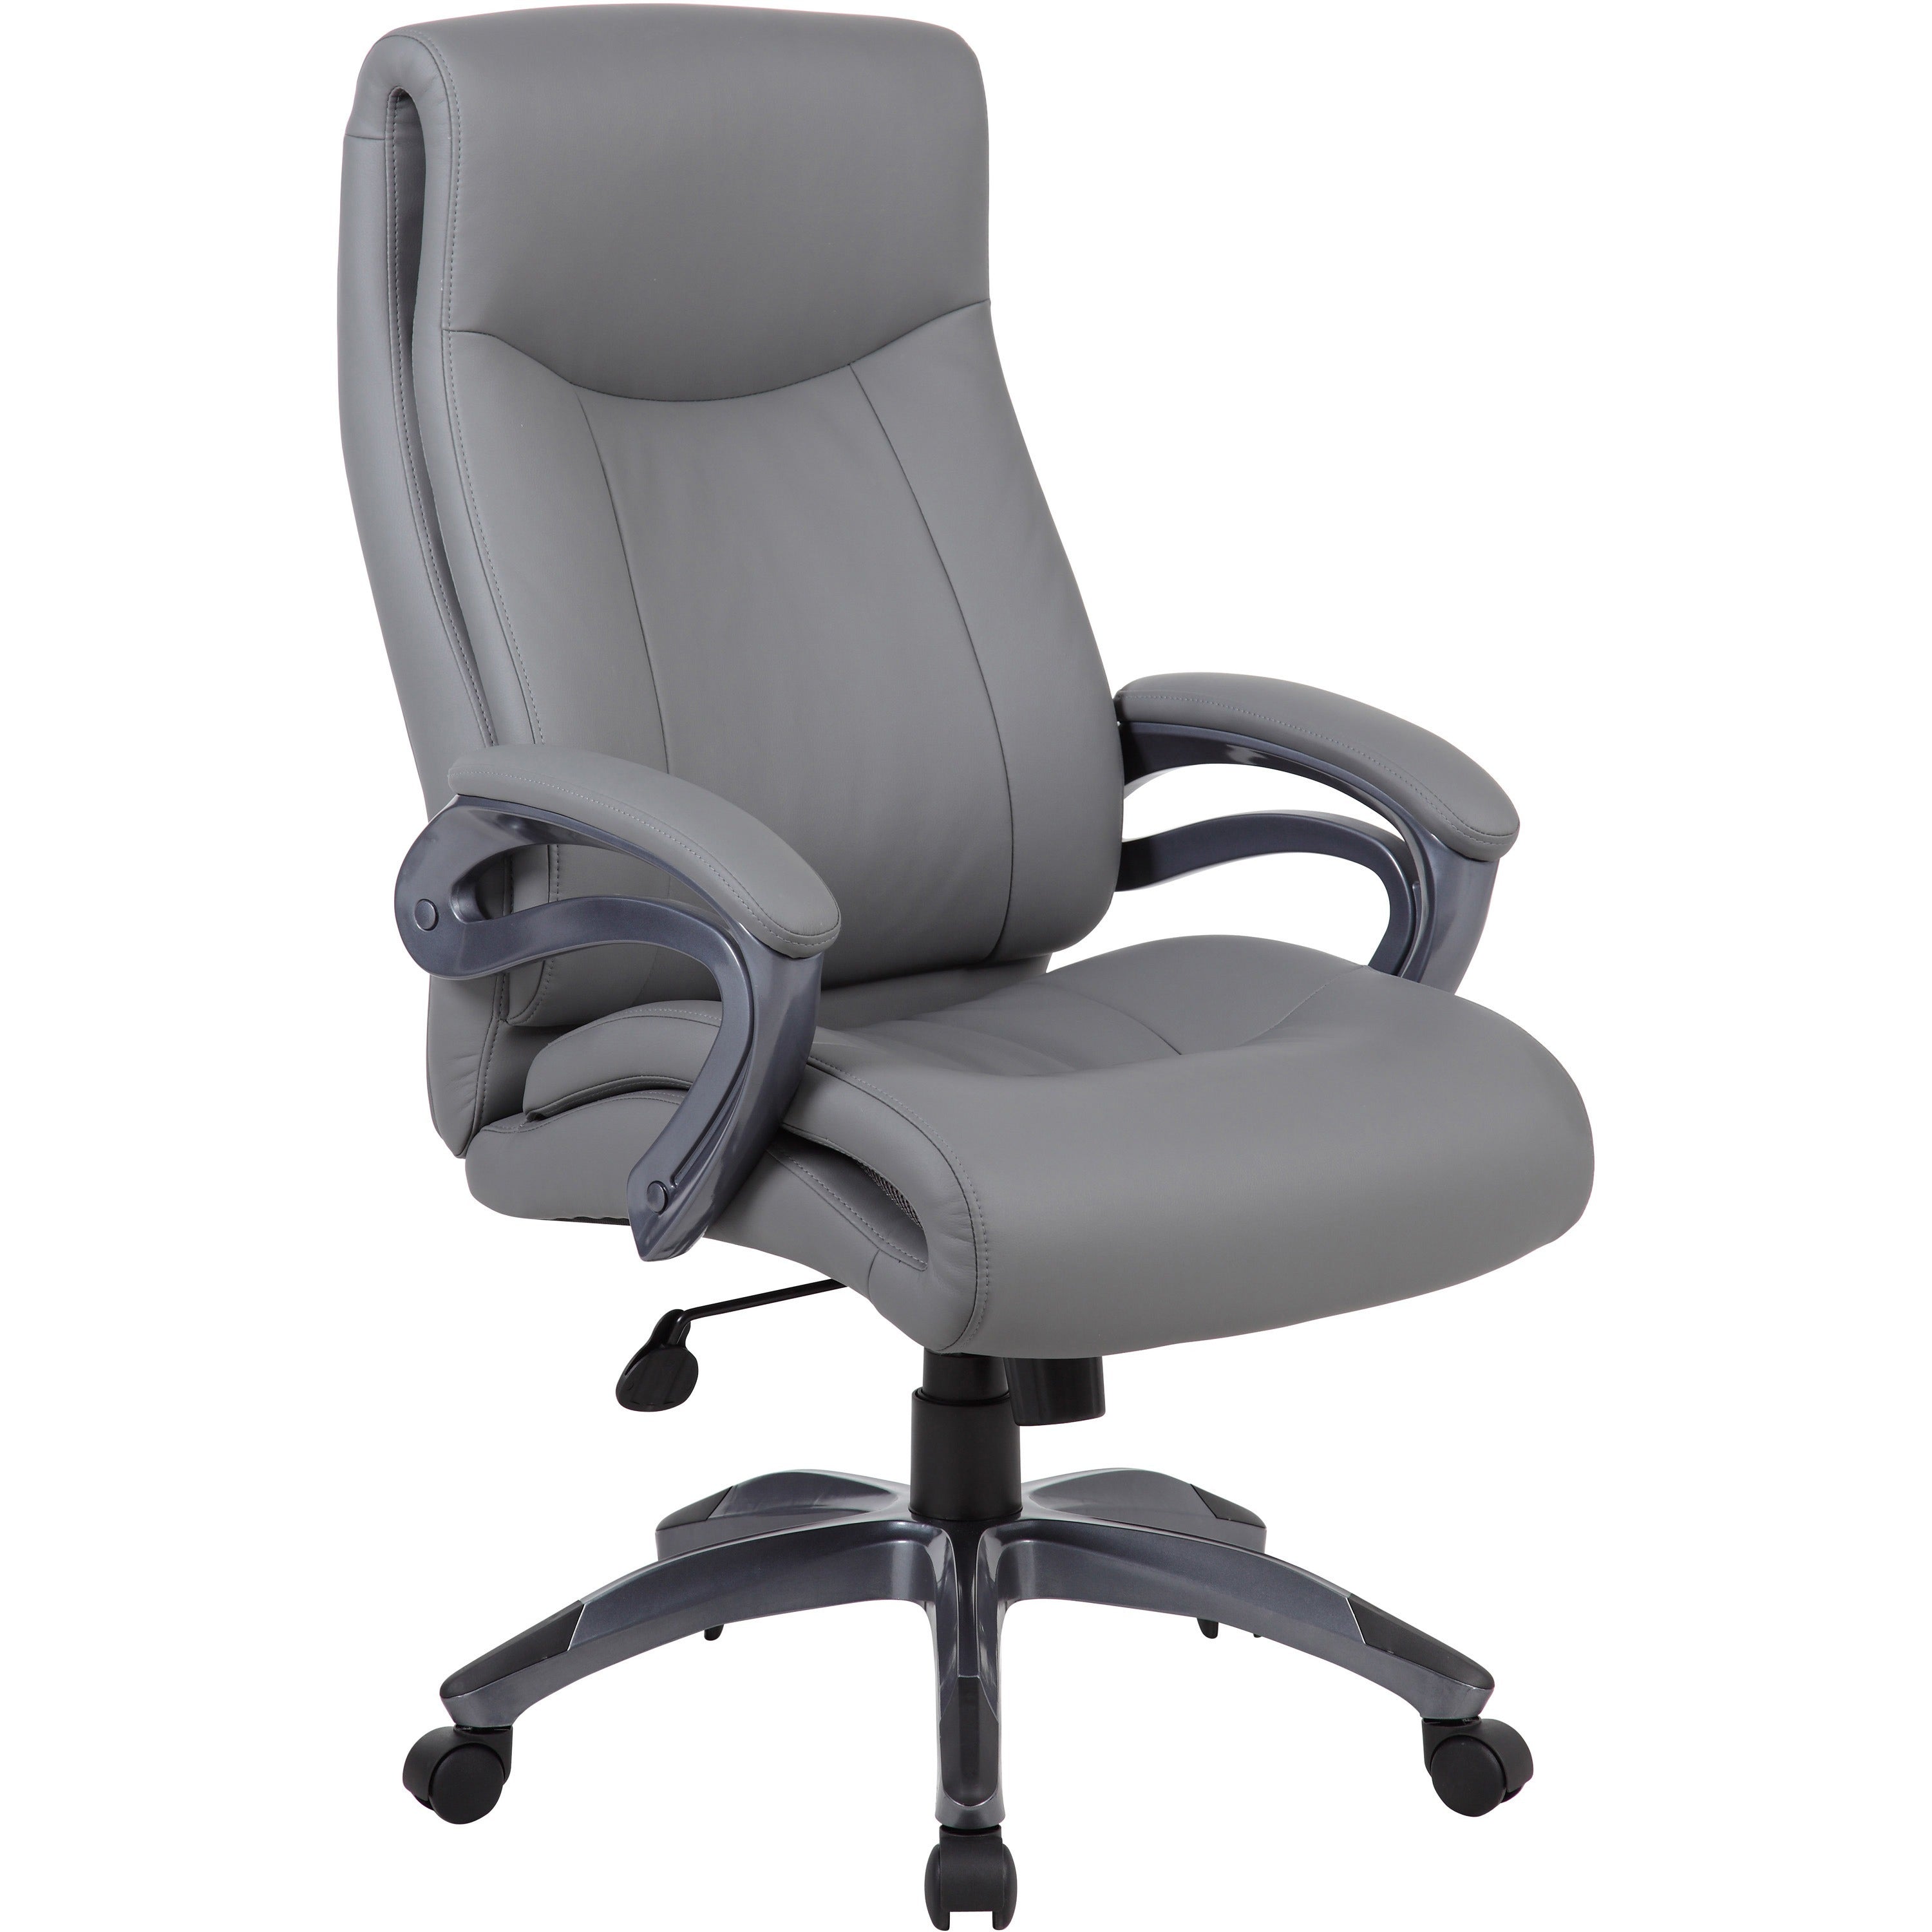 boss-double-layer-patented-executive-chair-gray-leatherplus-seat-black-gray-nylon-frame-high-back-5-star-base-charcoal-gray-1-each_bopb8661gy - 1